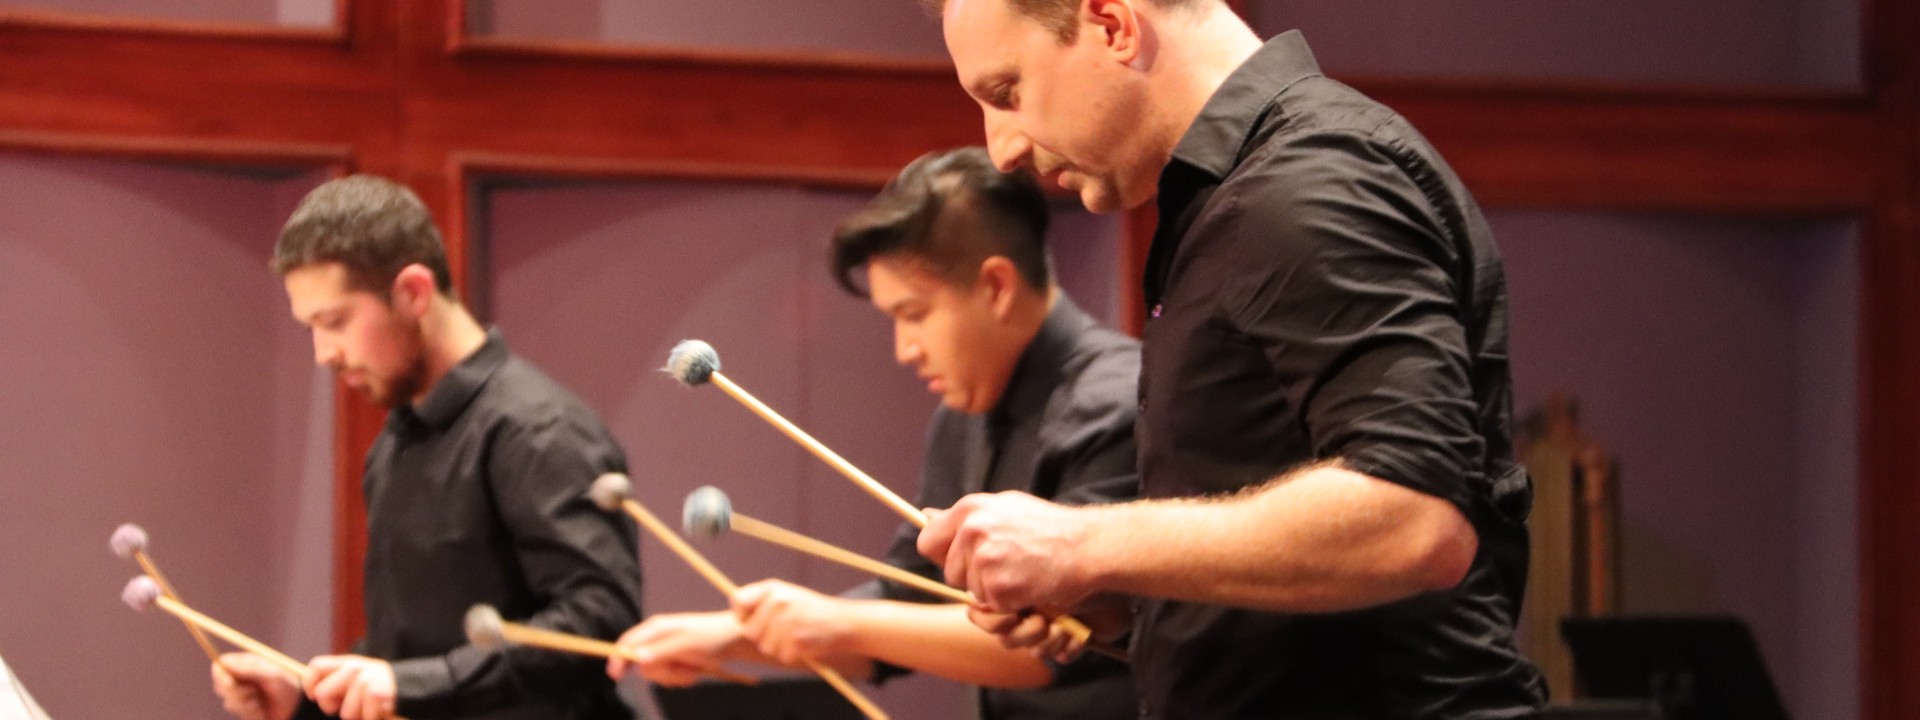 Percussionists with mallets